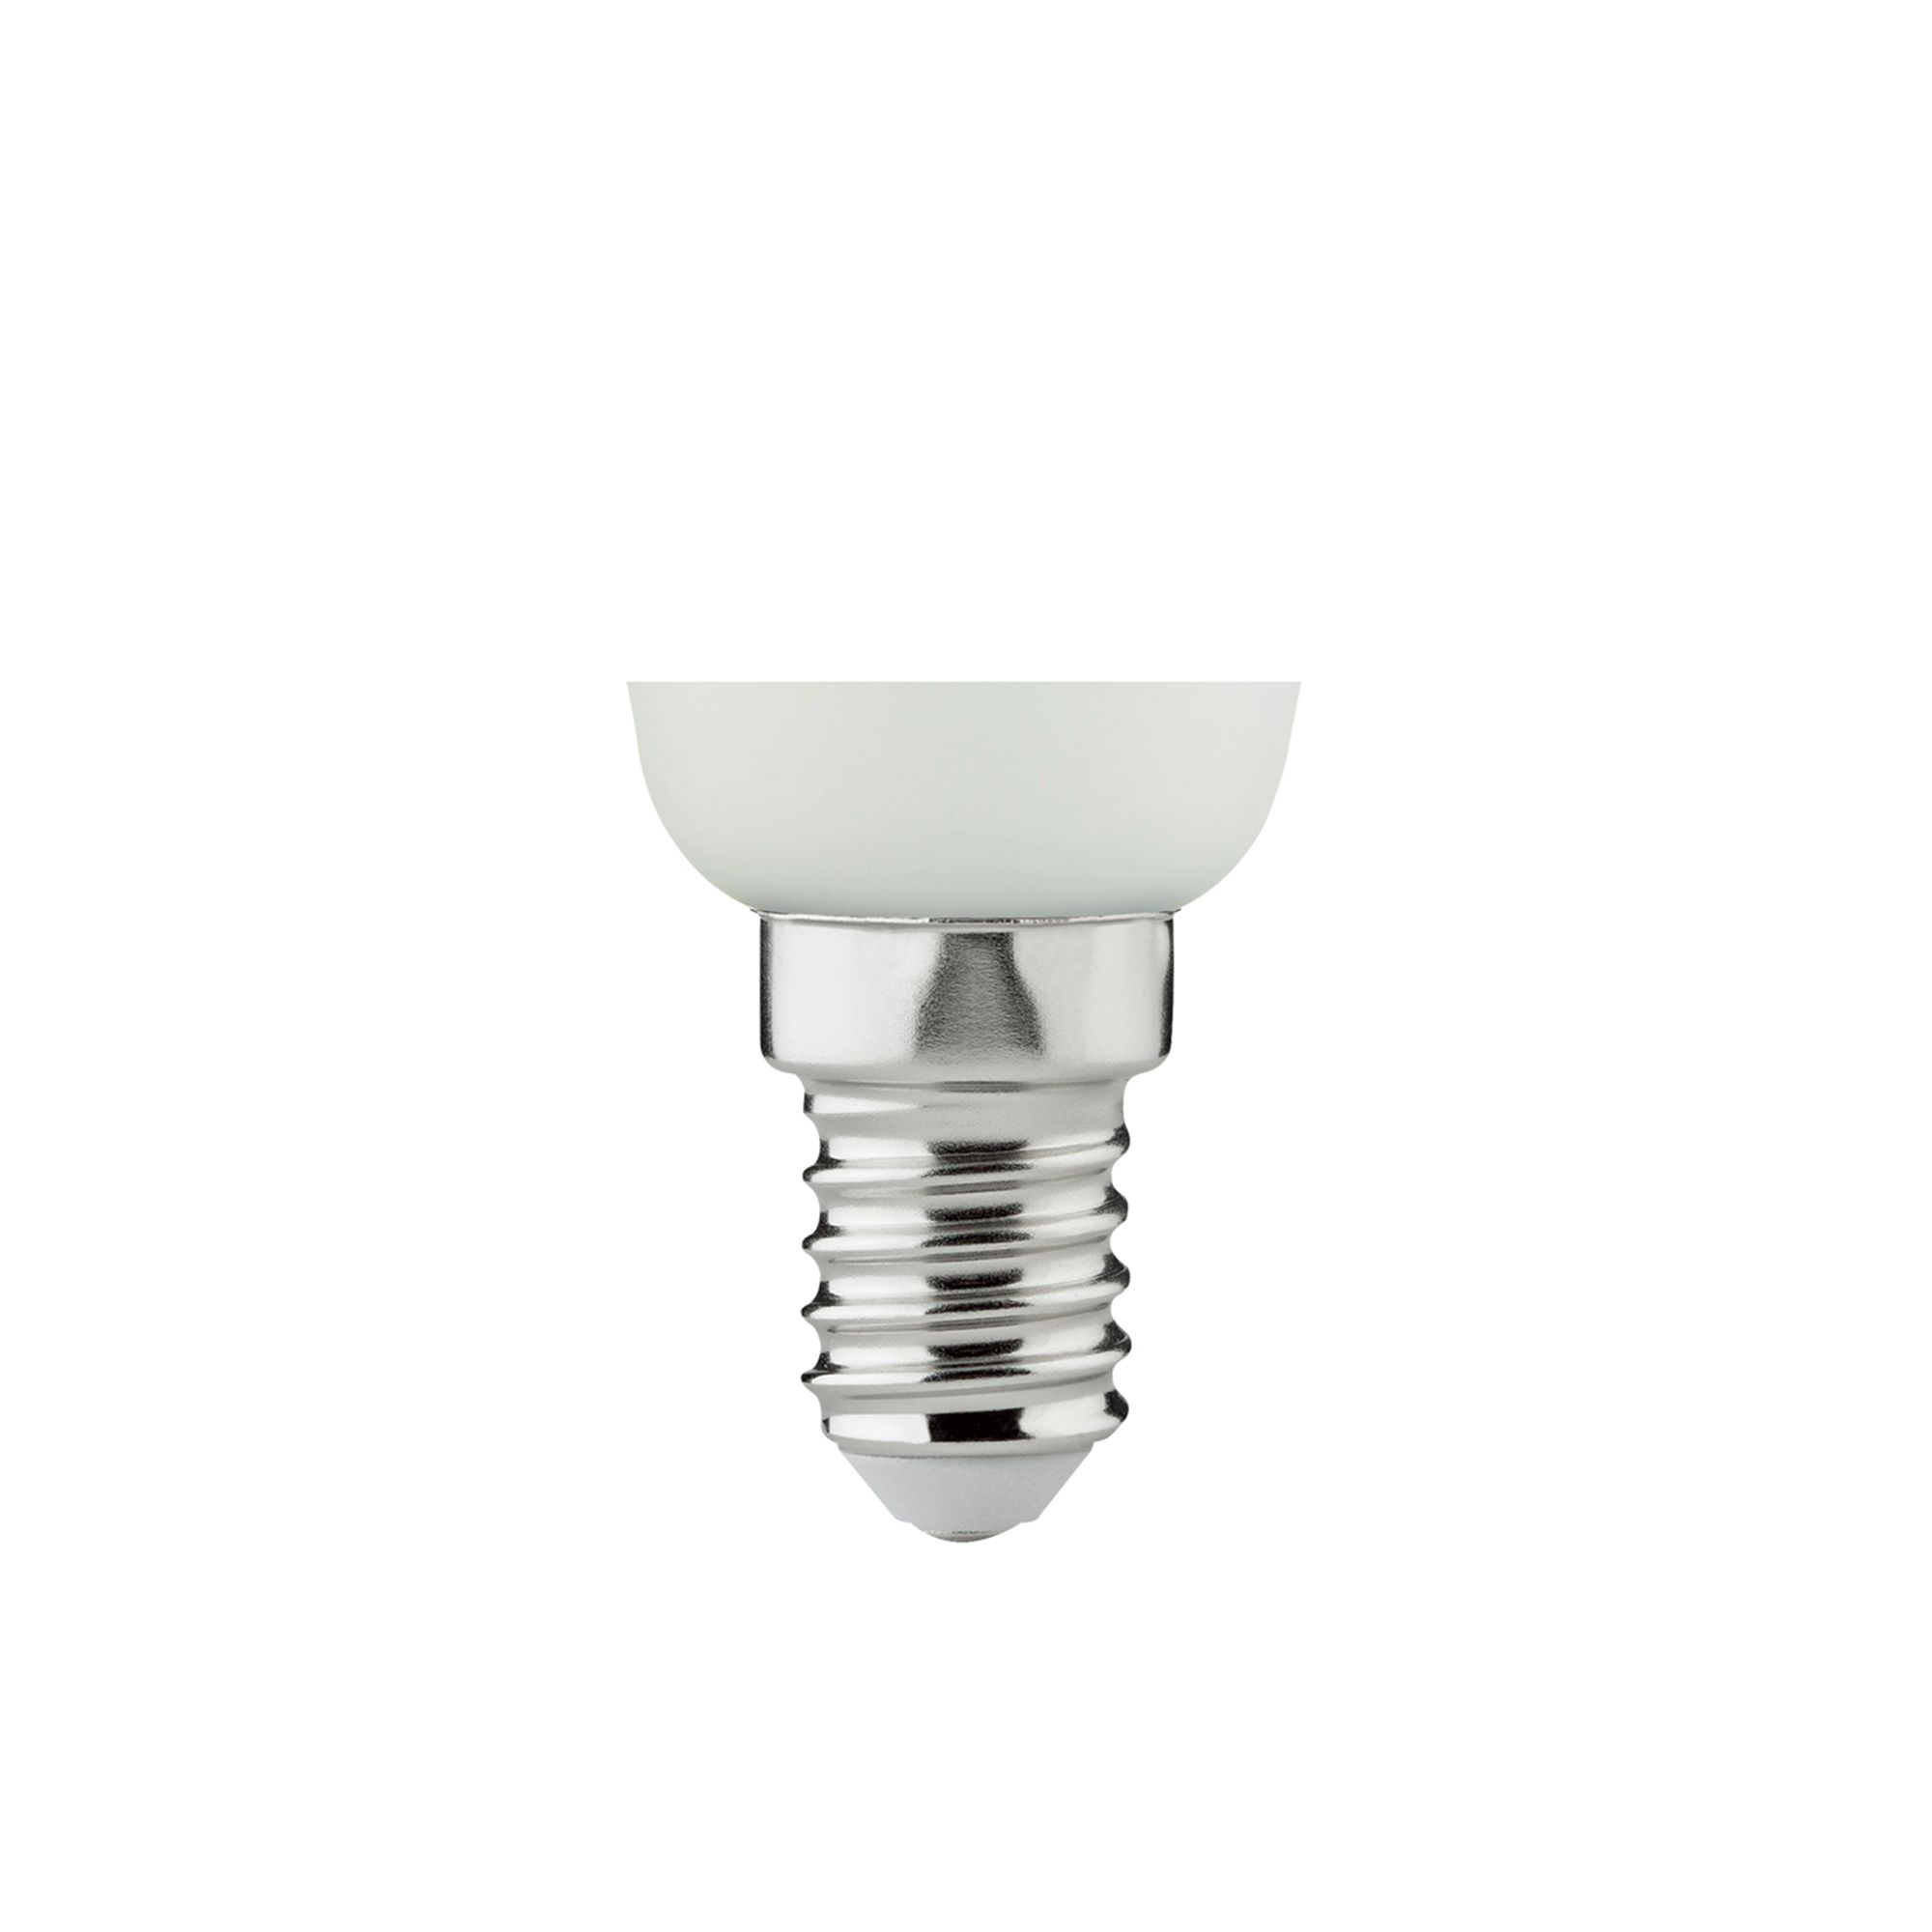 Diall 4.2W 470lm Frosted Mini globe Warm white LED Light bulb, Pack of 3